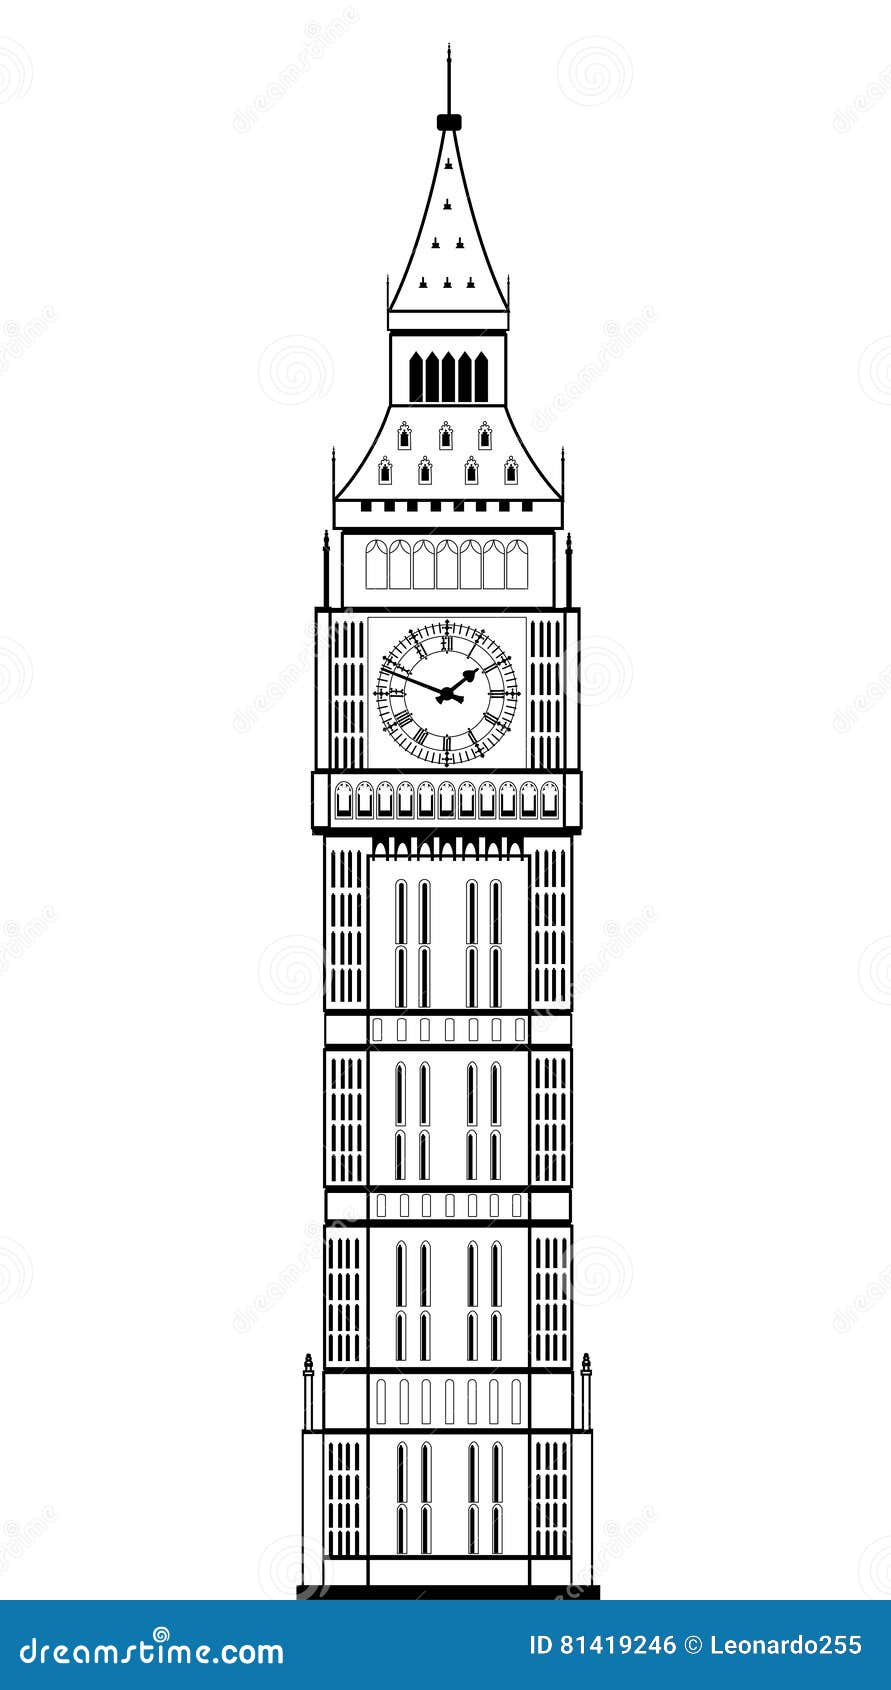 How to Draw the Big Ben - Really Easy Drawing Tutorial